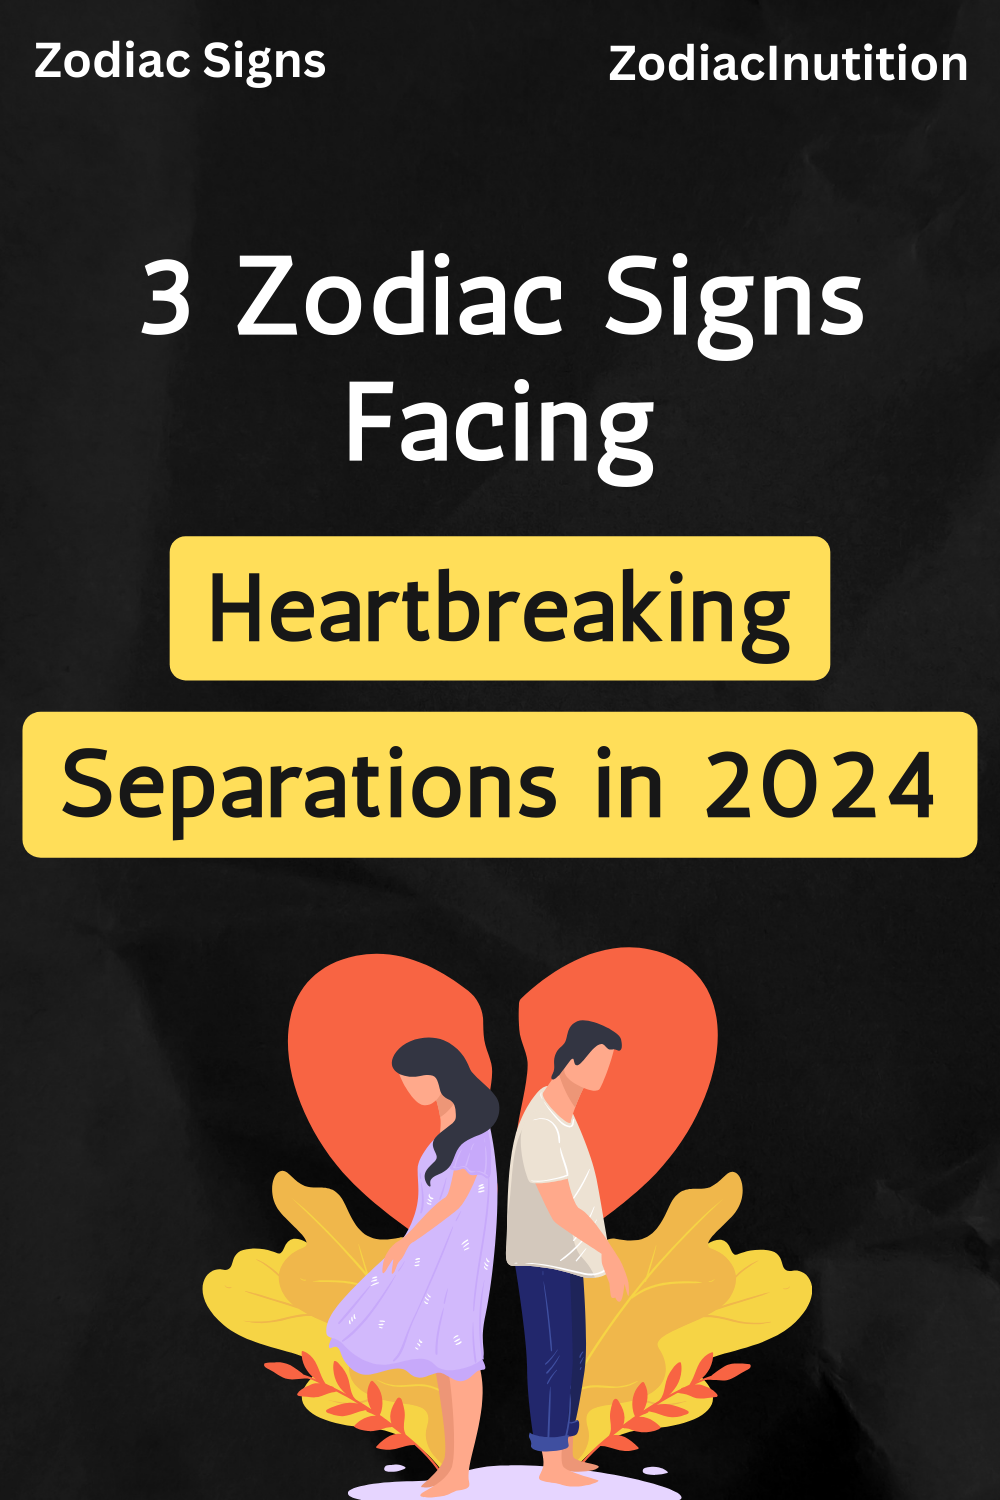 3 Zodiac Signs Facing Heartbreaking Separations in 2024